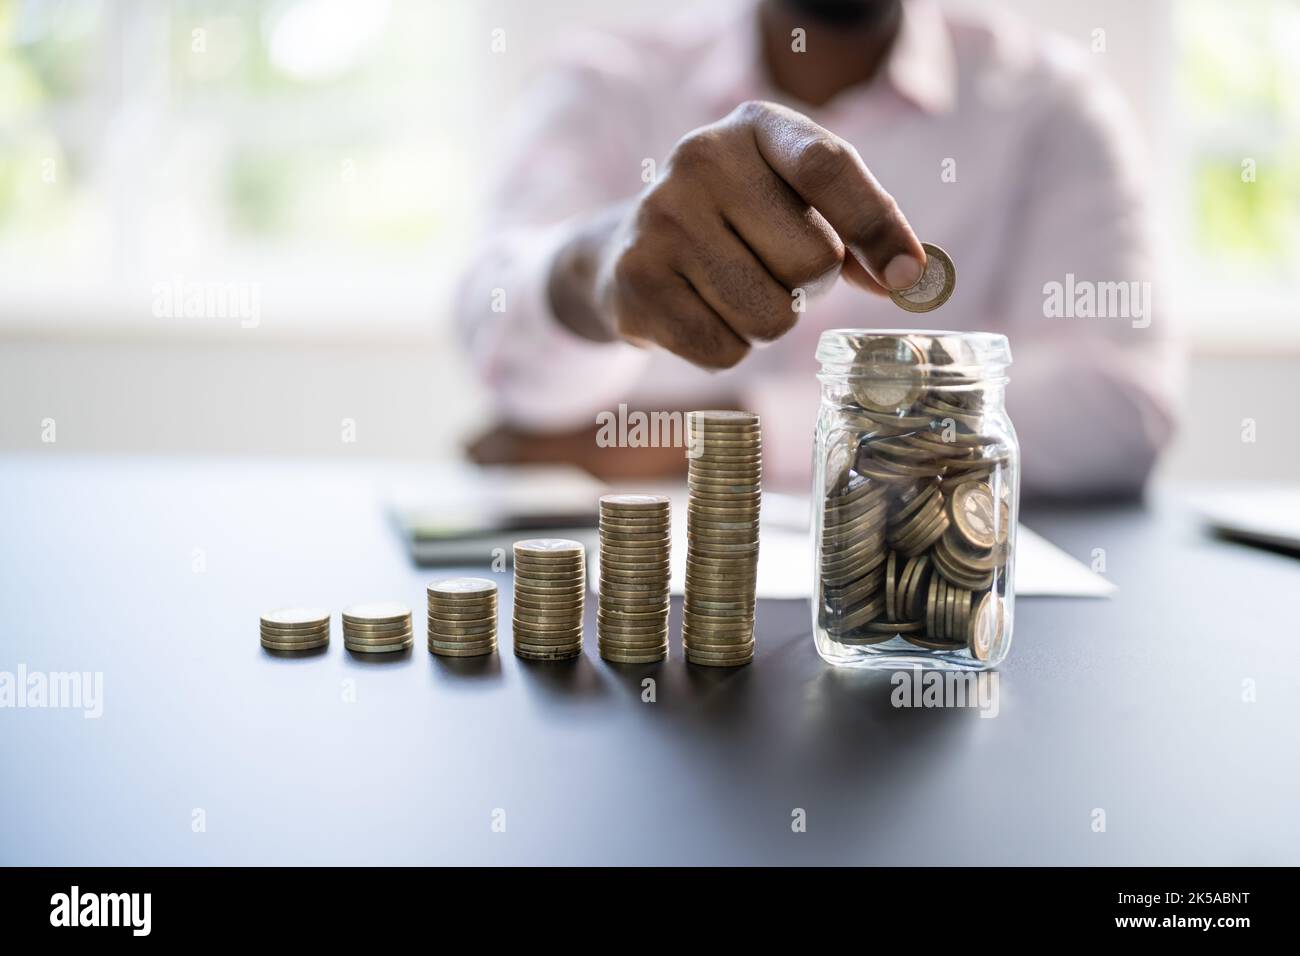 Pension Fund Jar. Coins And Inflation. Money Deposit Stock Photo